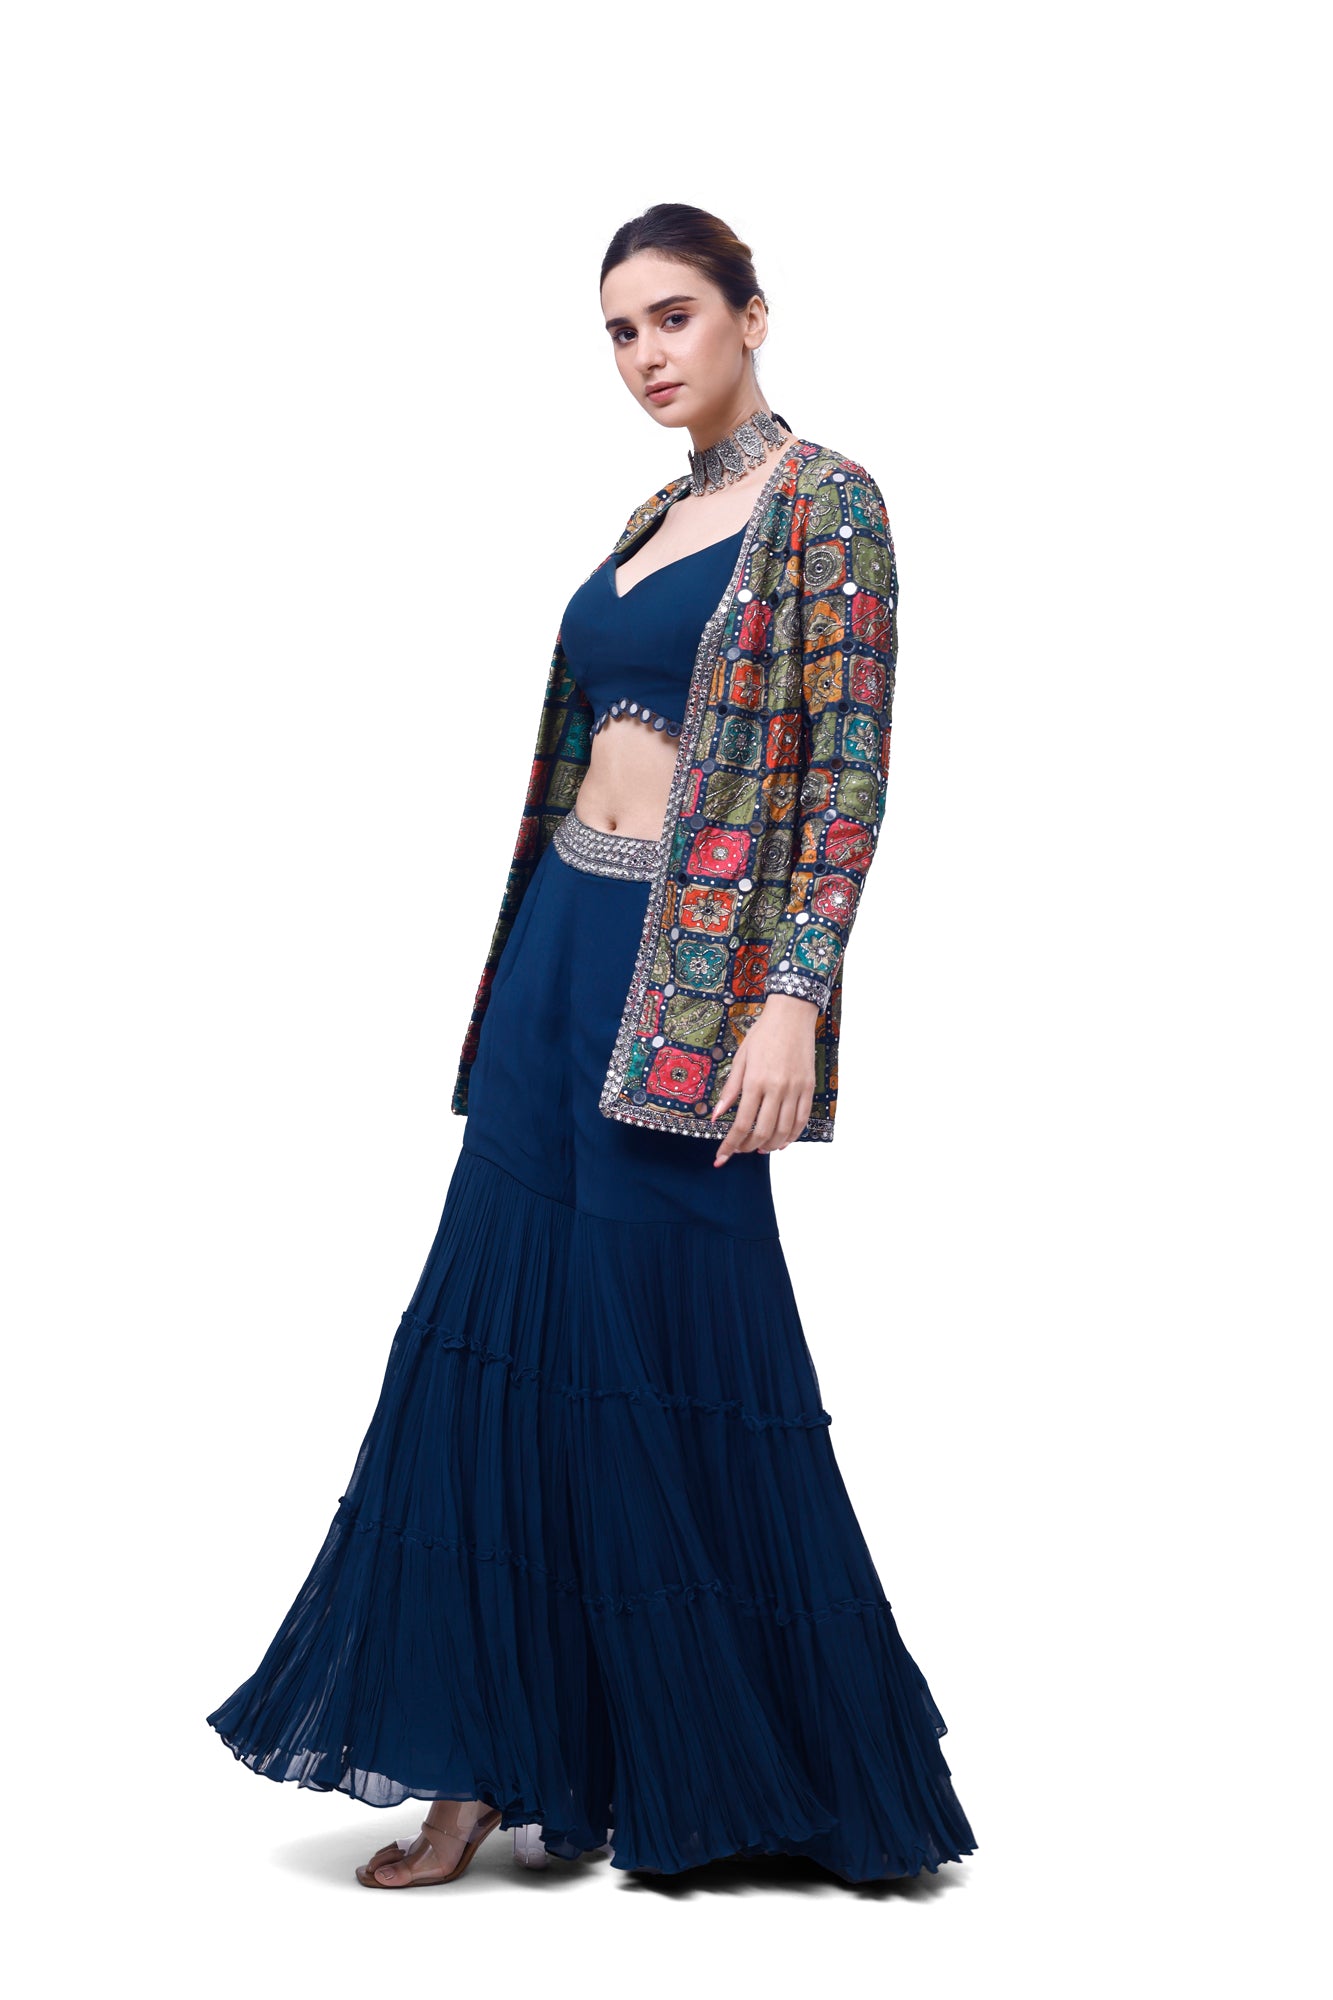 Buy navy blue georgette sharara set online in USA with embroidered jacket. Shop the best and latest designs in embroidered sarees, designer sarees, Anarkali suit, lehengas, sharara suits for weddings and special occasions from Pure Elegance Indian fashion store in USA.-set